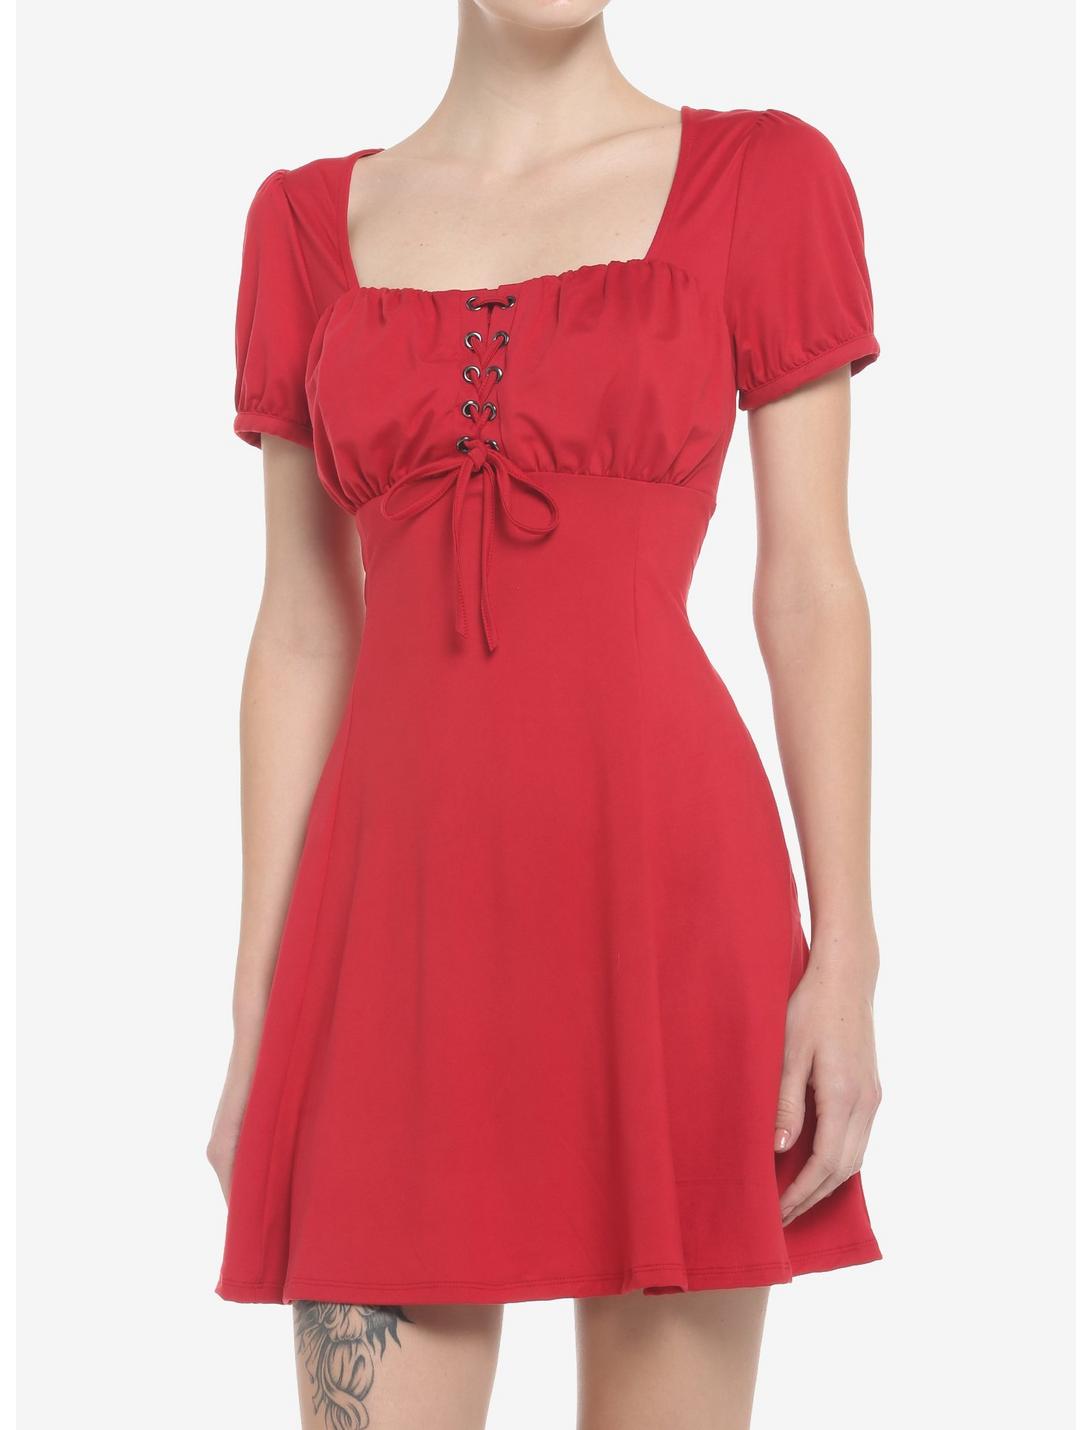 Red Empire Waist Dress, RED, hi-res